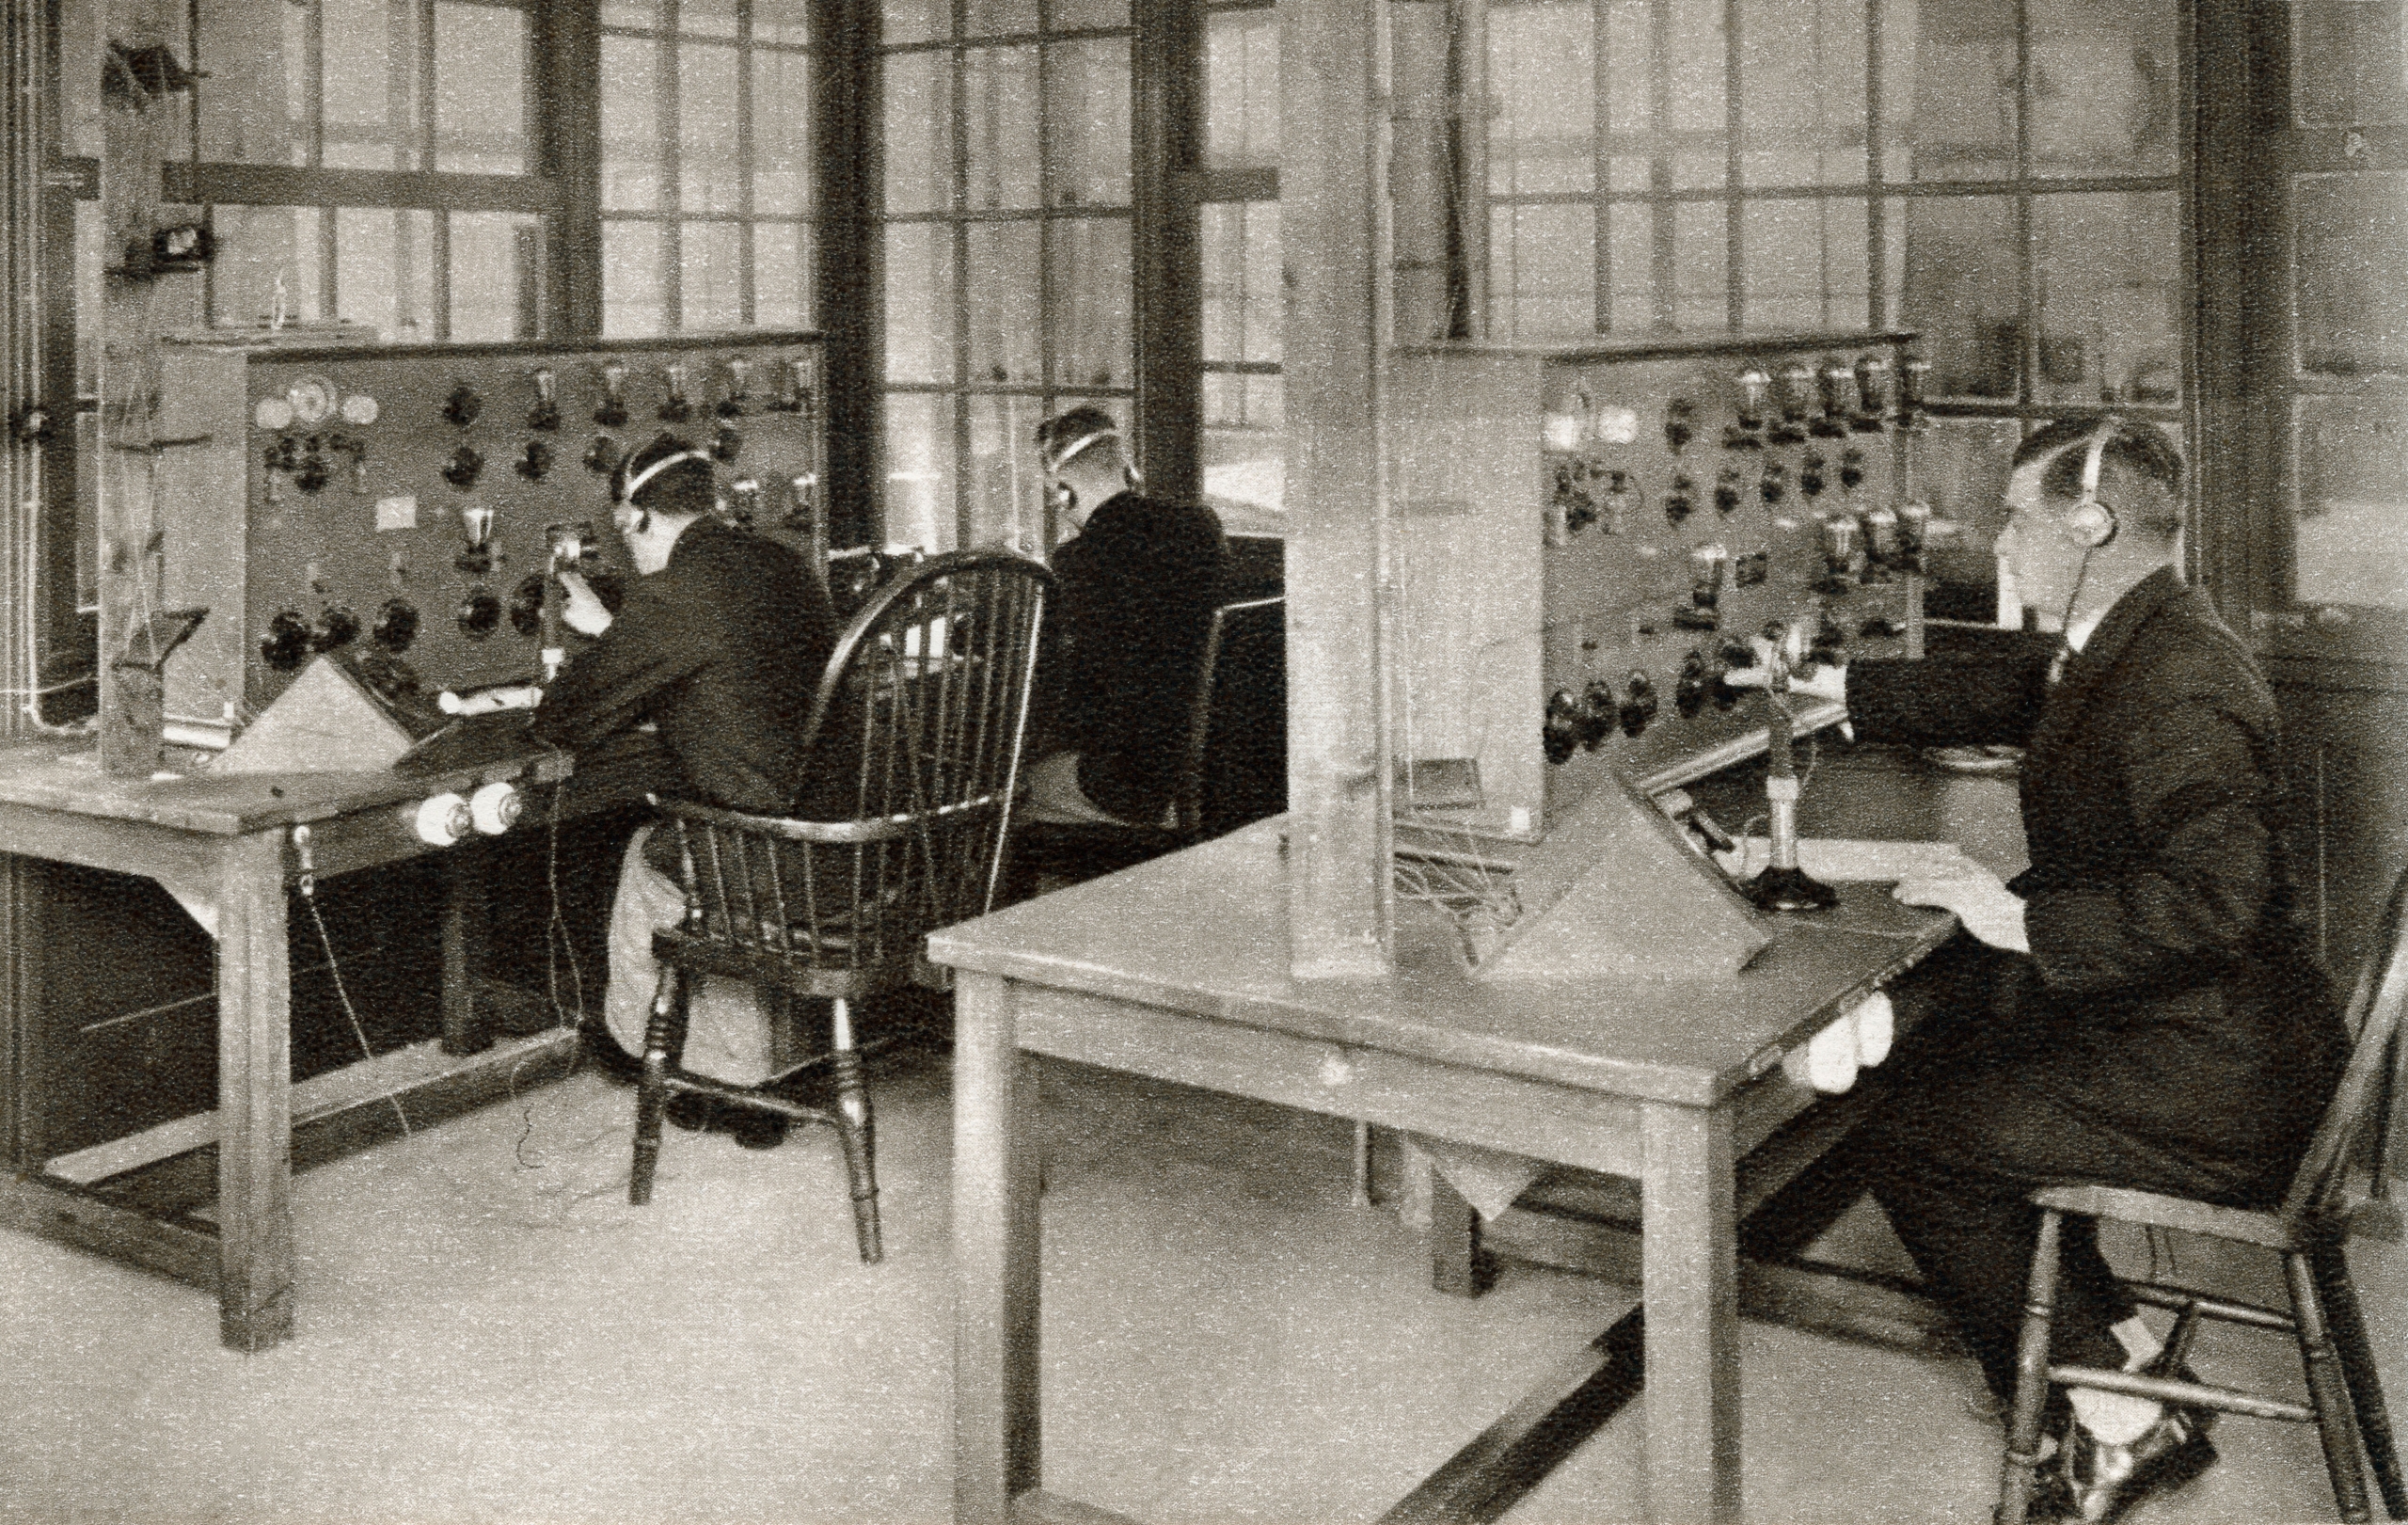 The wireless transmission room at Croydon Aerodrome, London, England which was re-opened in 1928